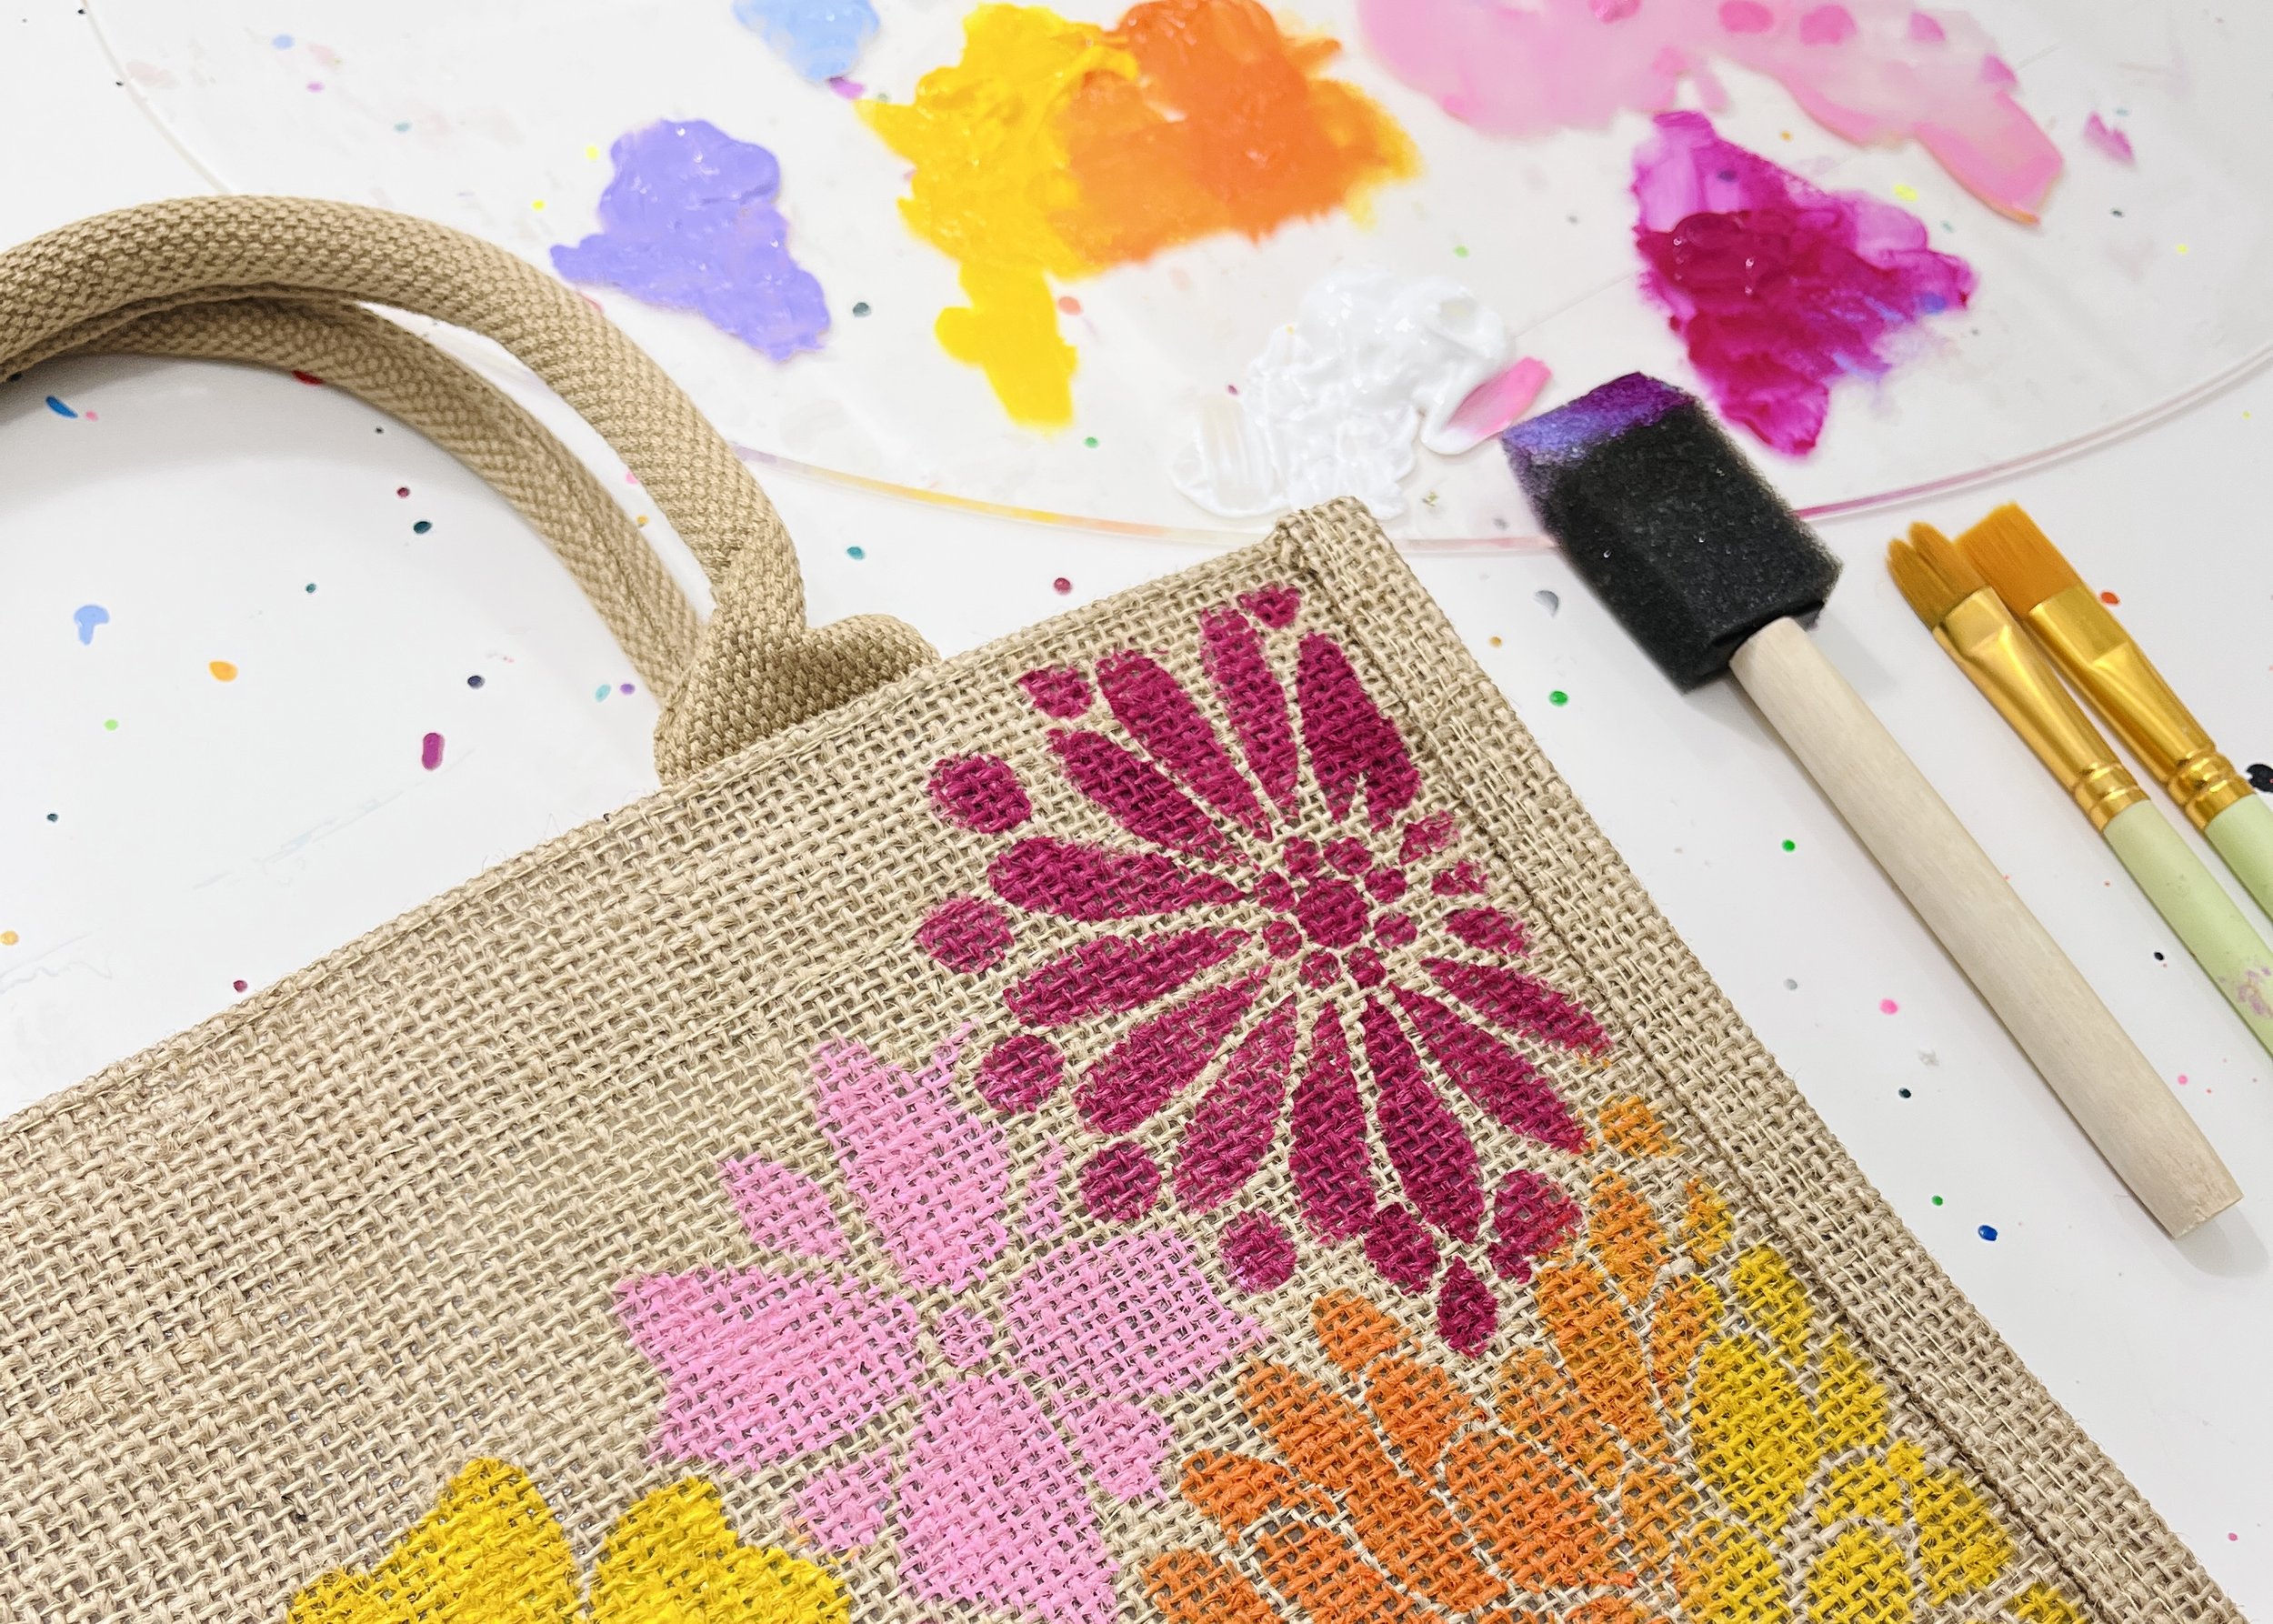 Paint Your Own Tote Bag! Patio Event - Burst of Butterflies